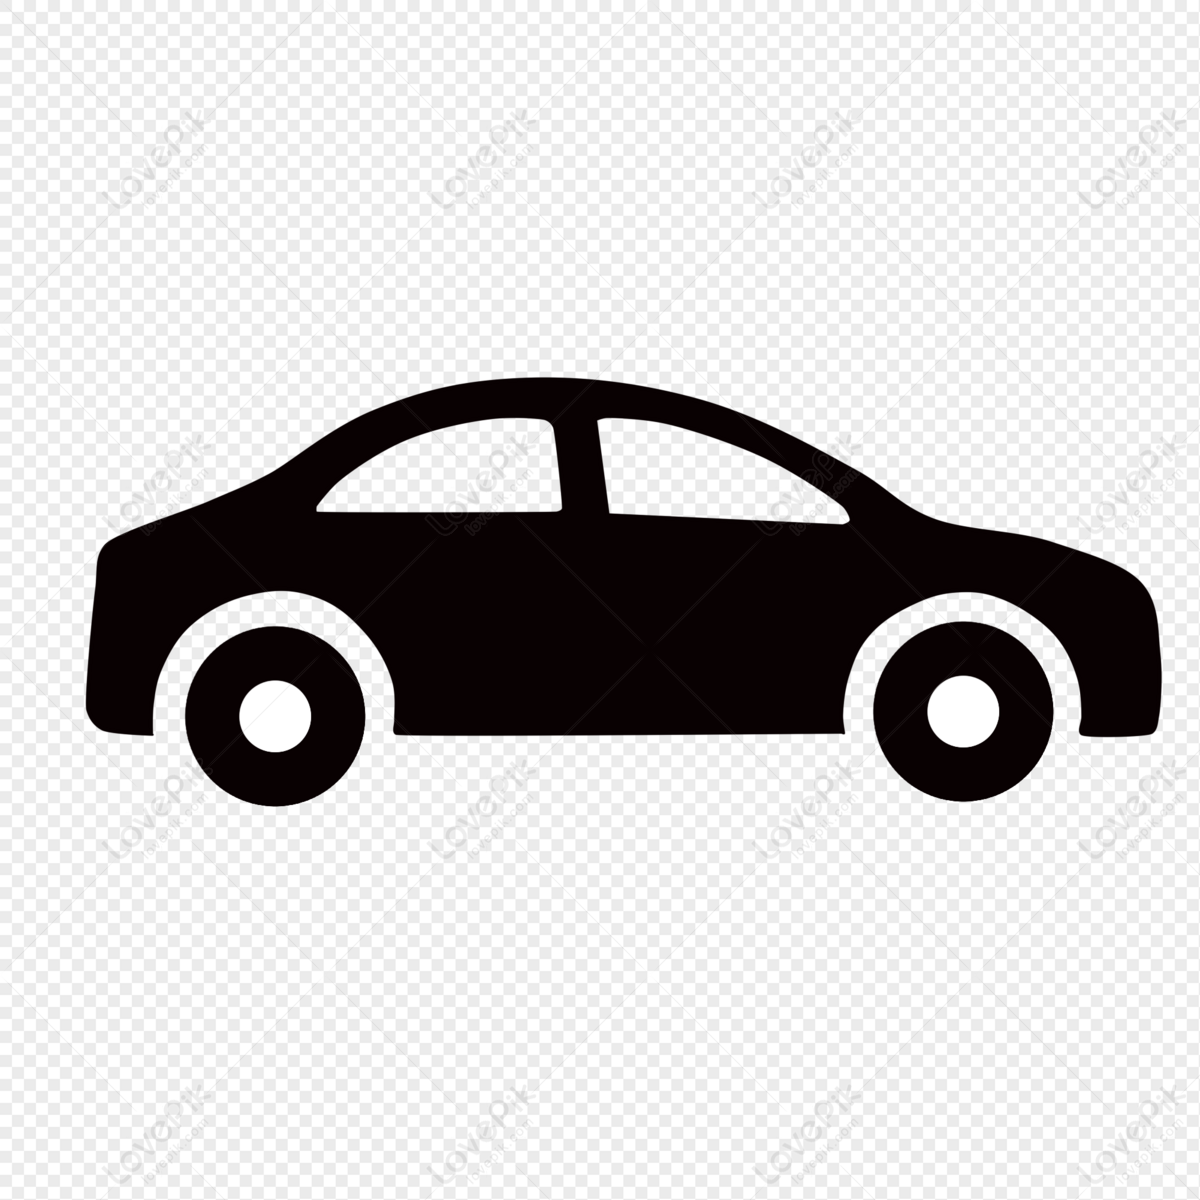 Car icon, car icon, vehicle, car png hd transparent image